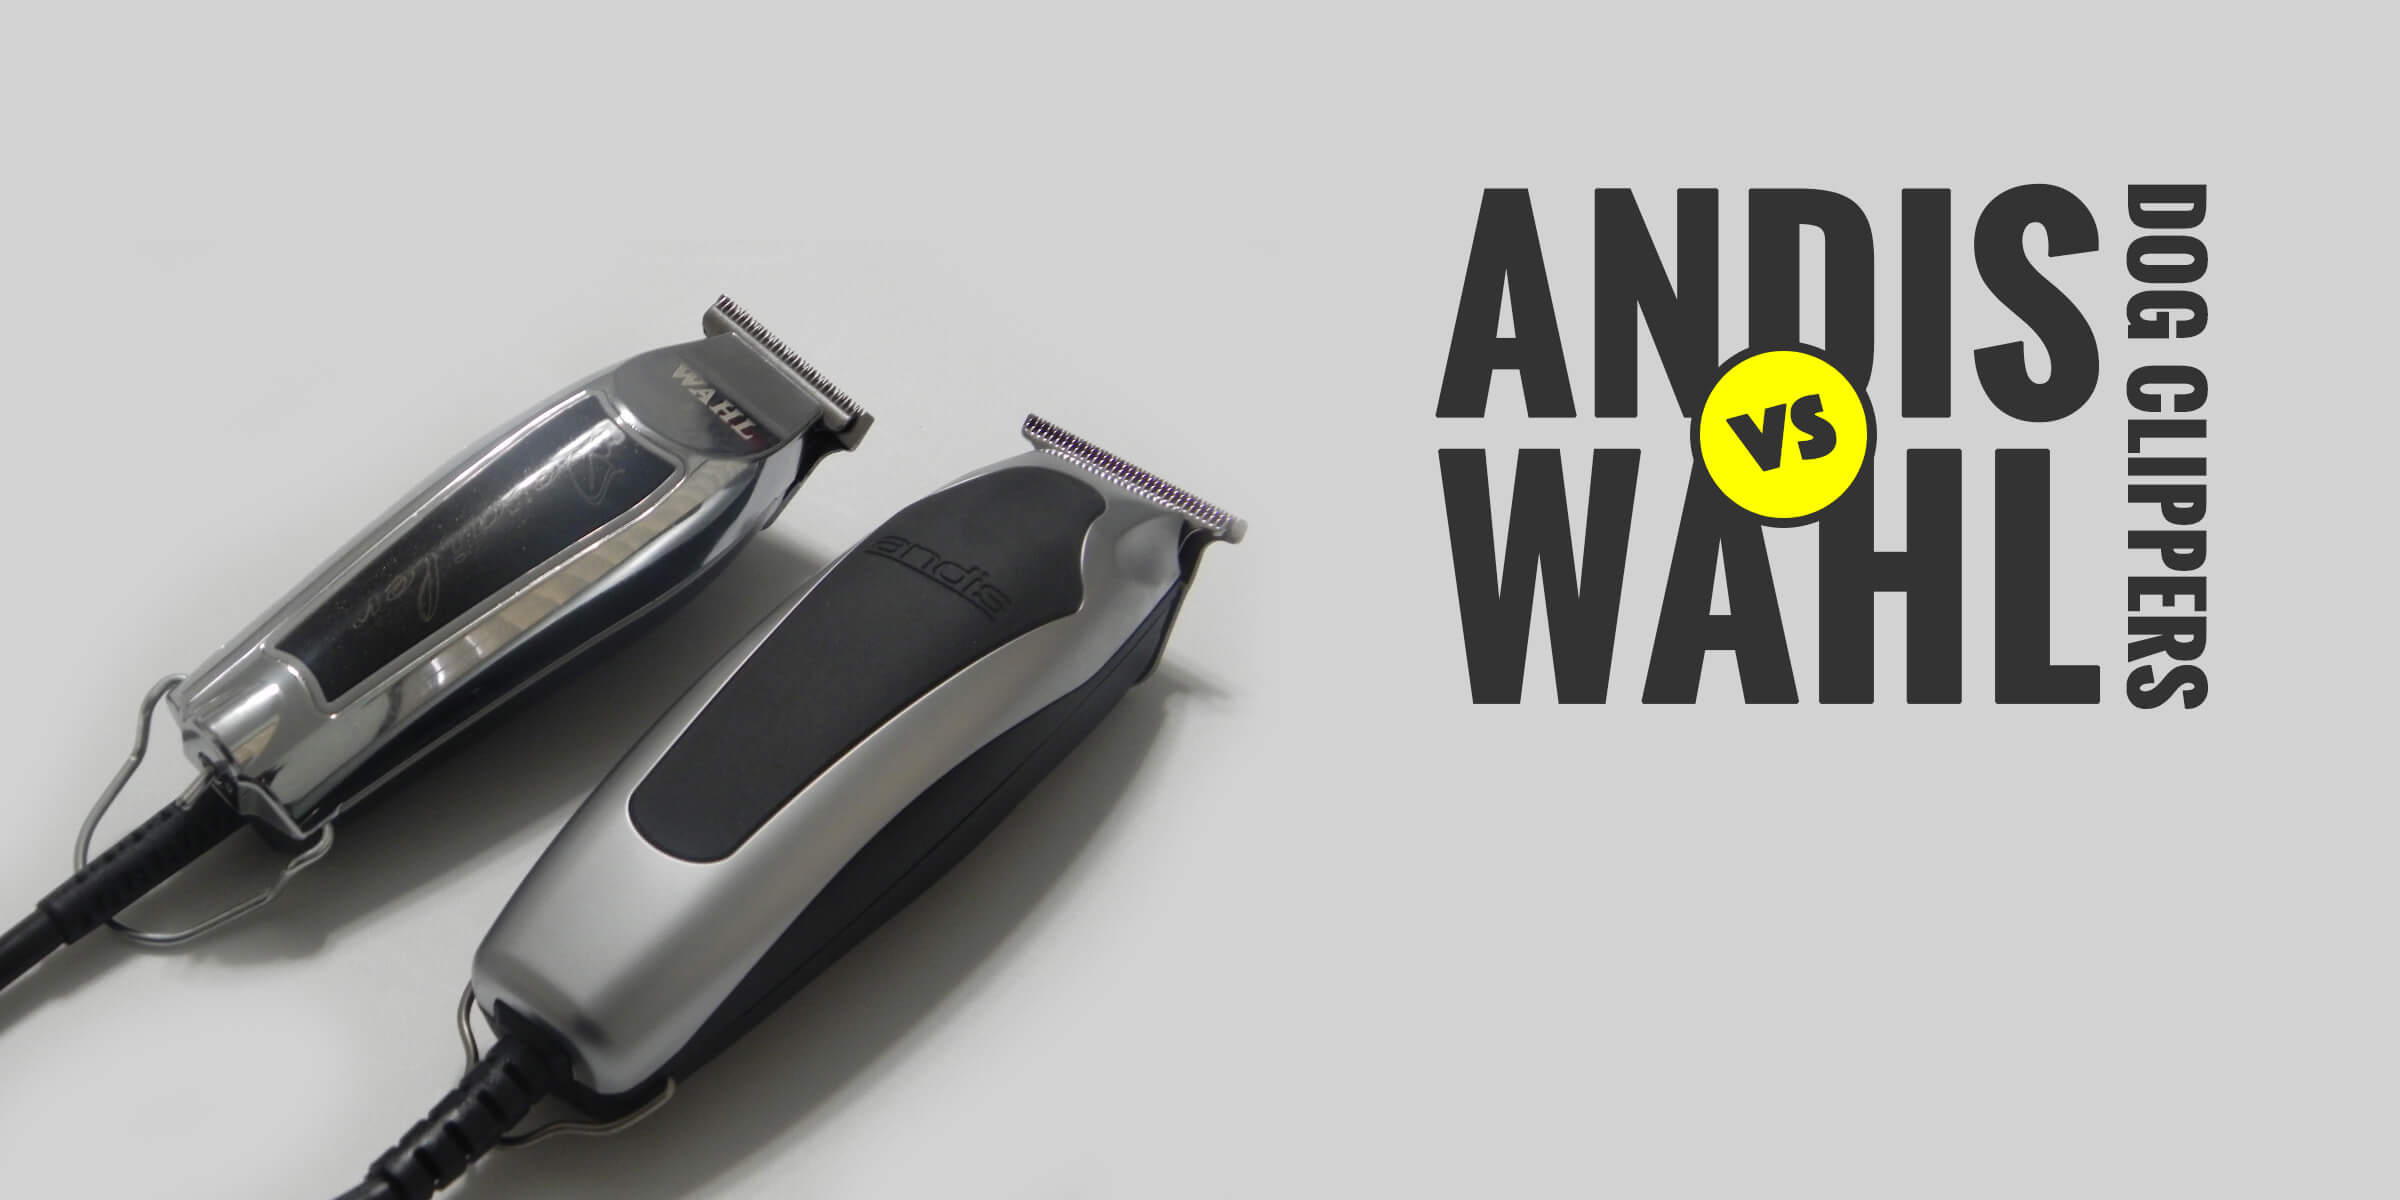 which is better wahl or andis